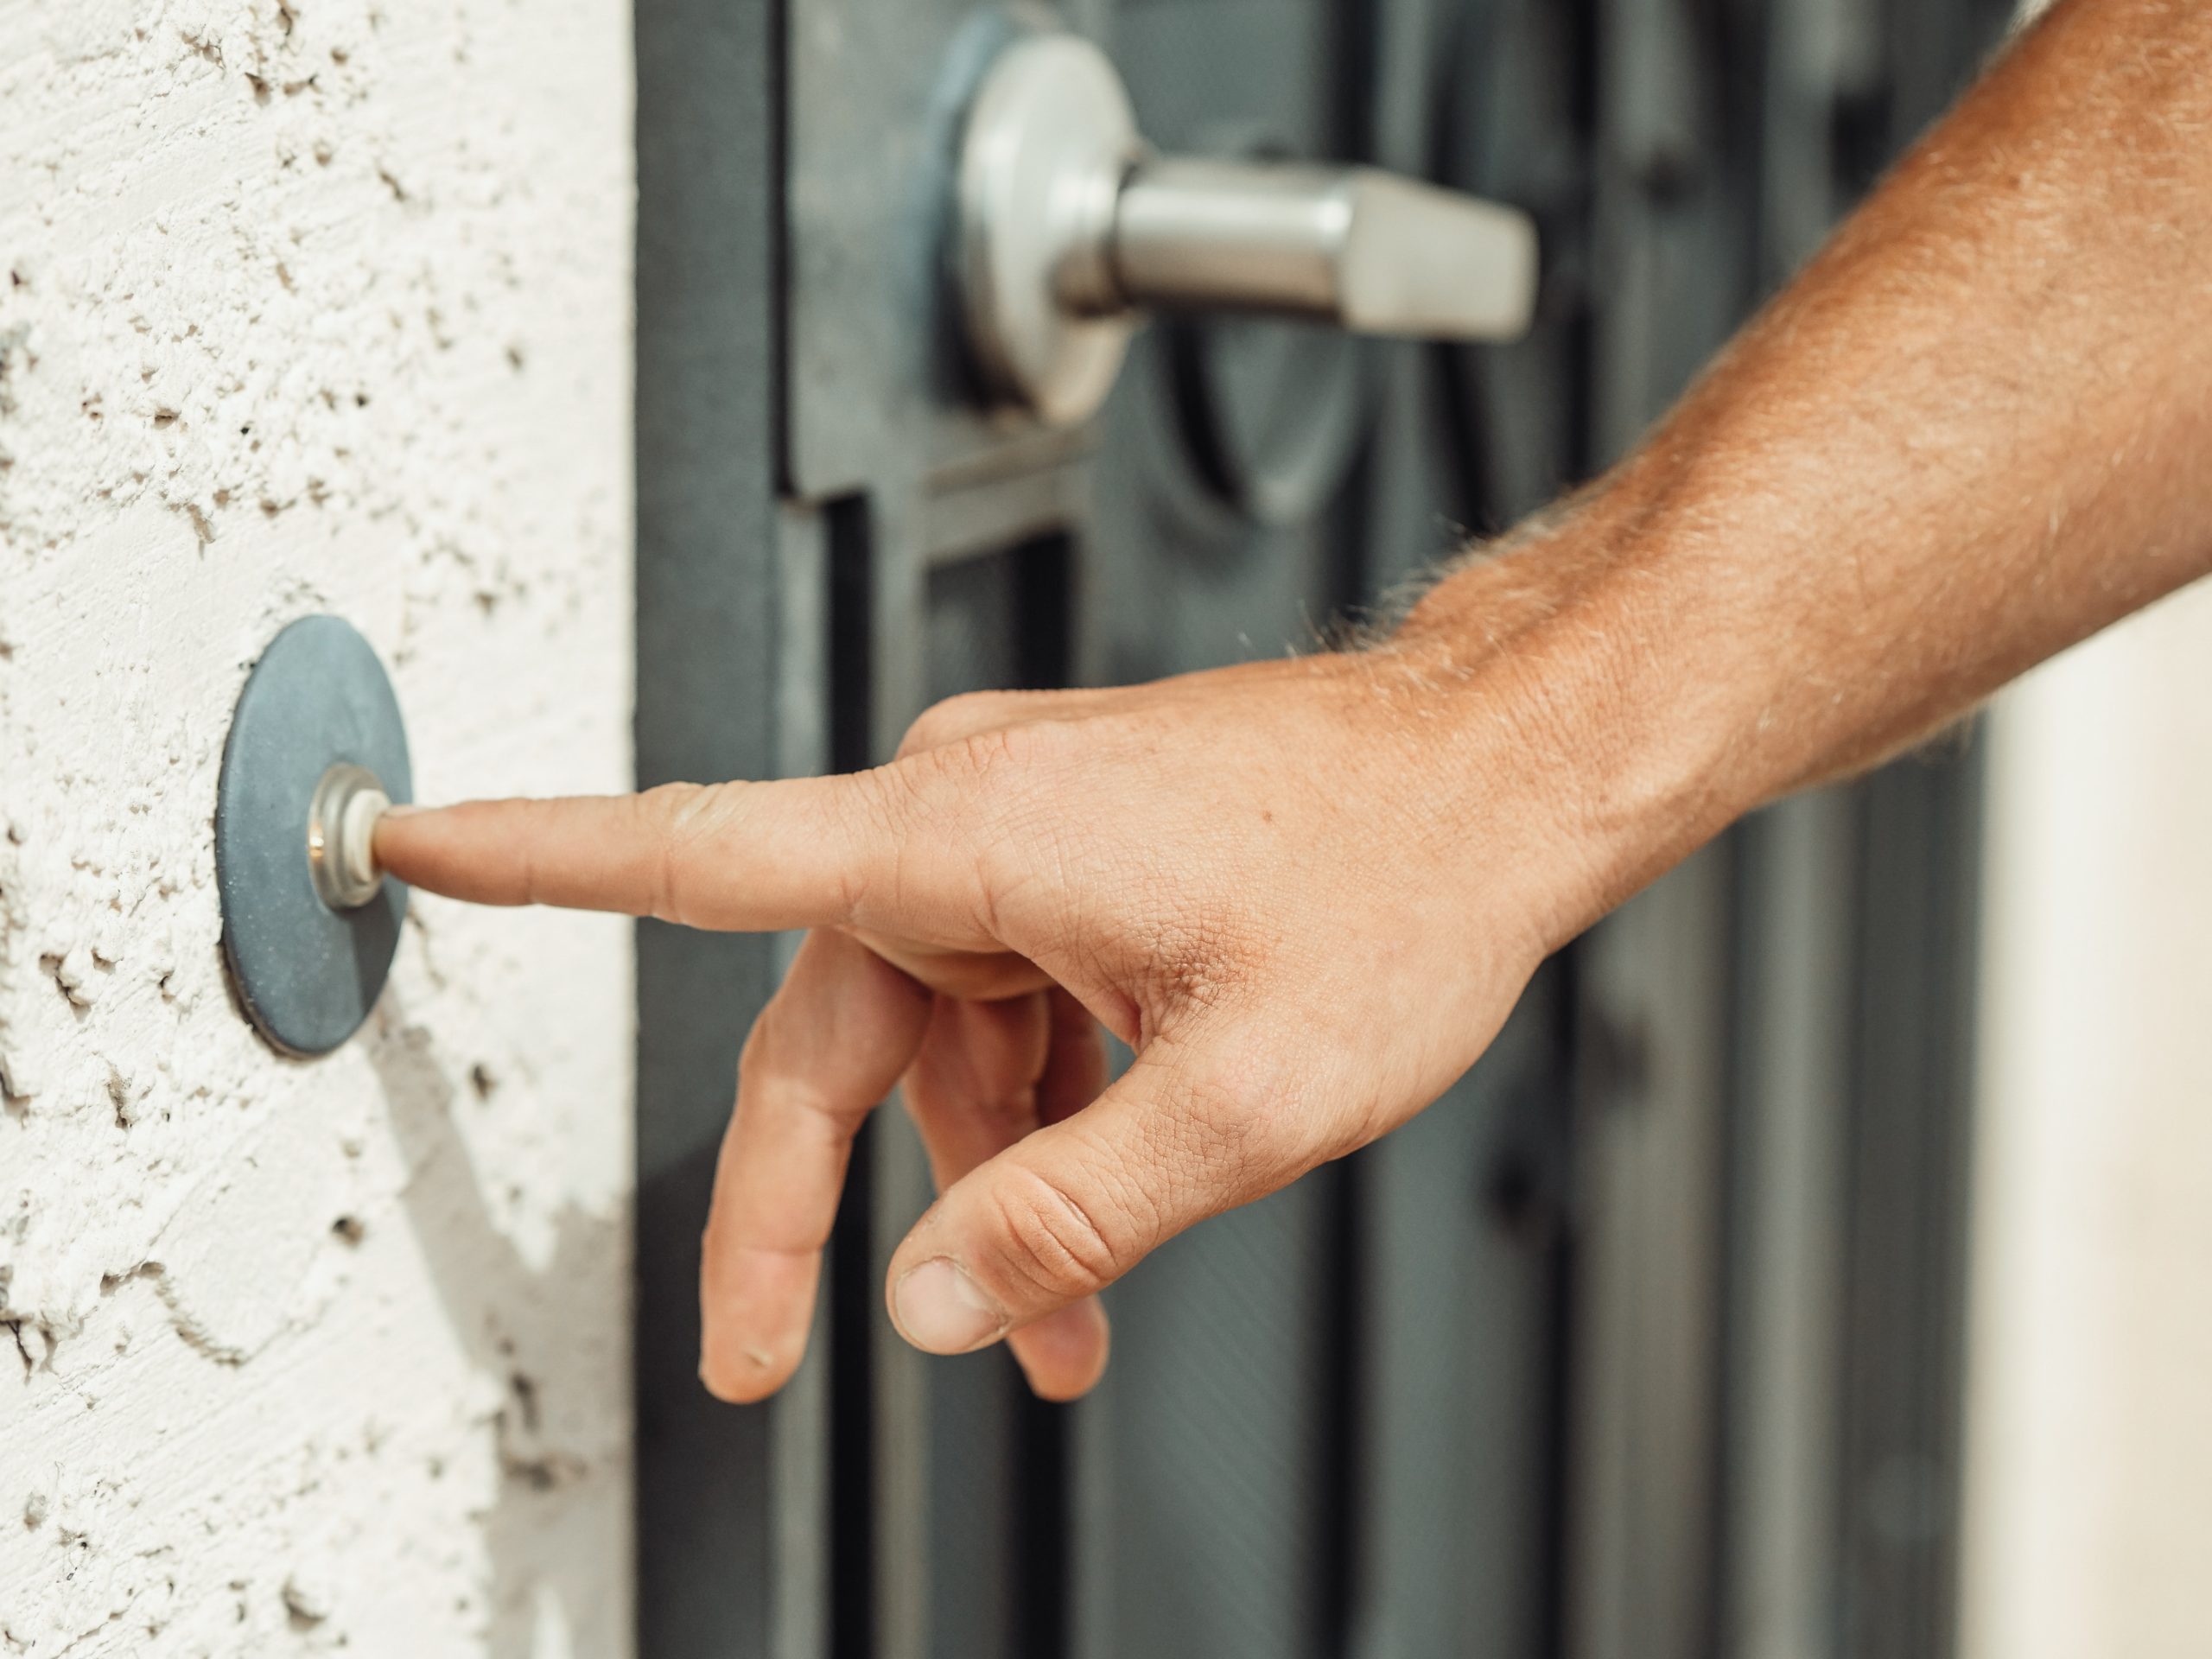 5 Ways to Decrease Your Chances of a Residential Break-In